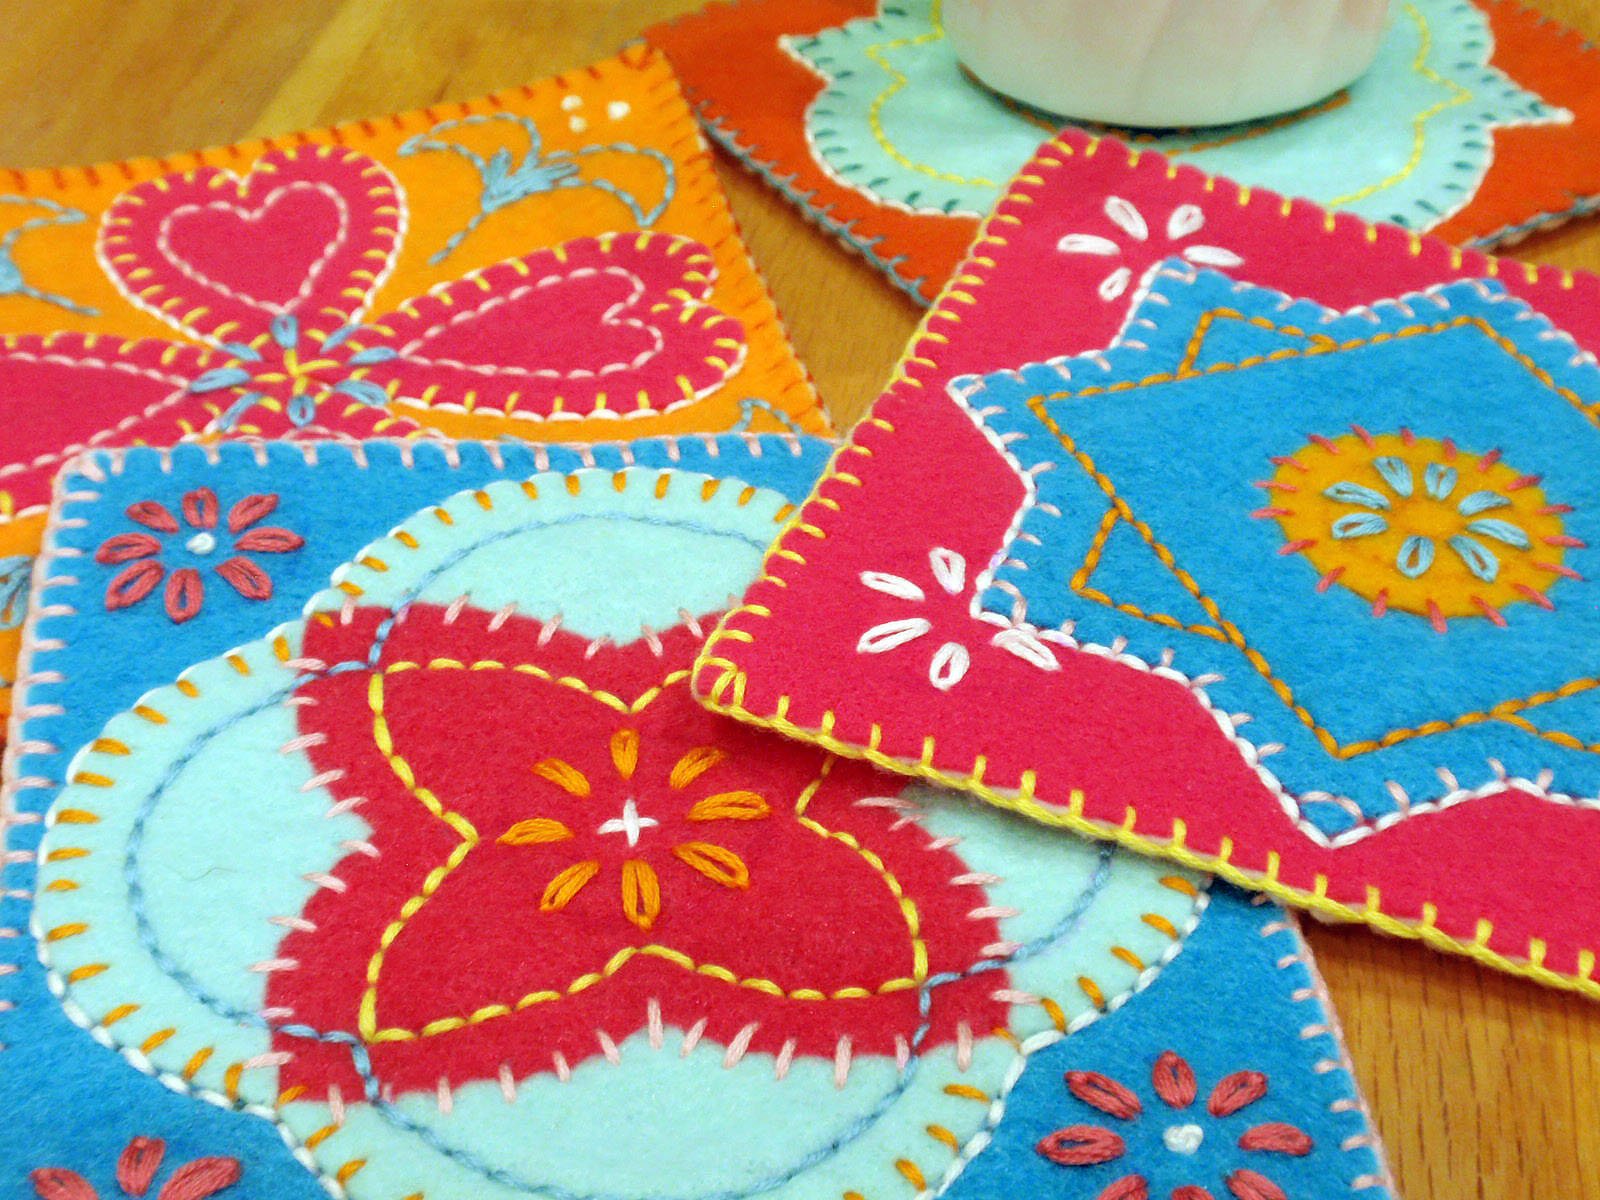 Colorful Felt Coasters (including Free Pattern!)